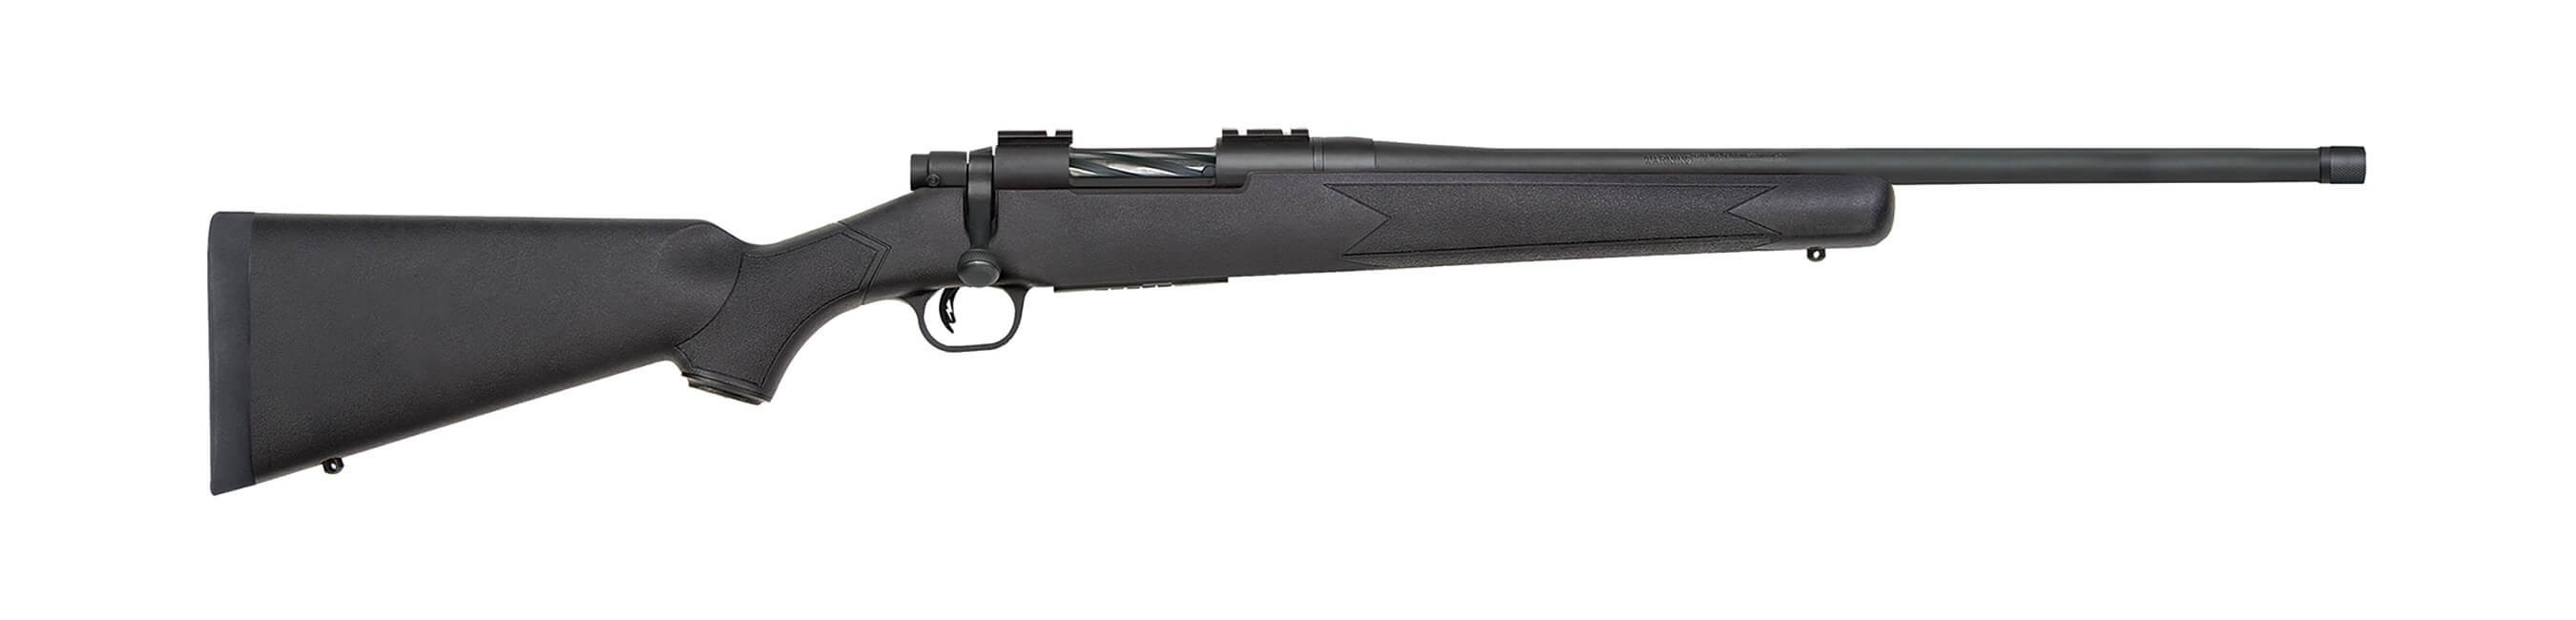 RIFLE MOSSBERG PATRIOT SYNTHETIC CALIBRE .30-06 SPRG